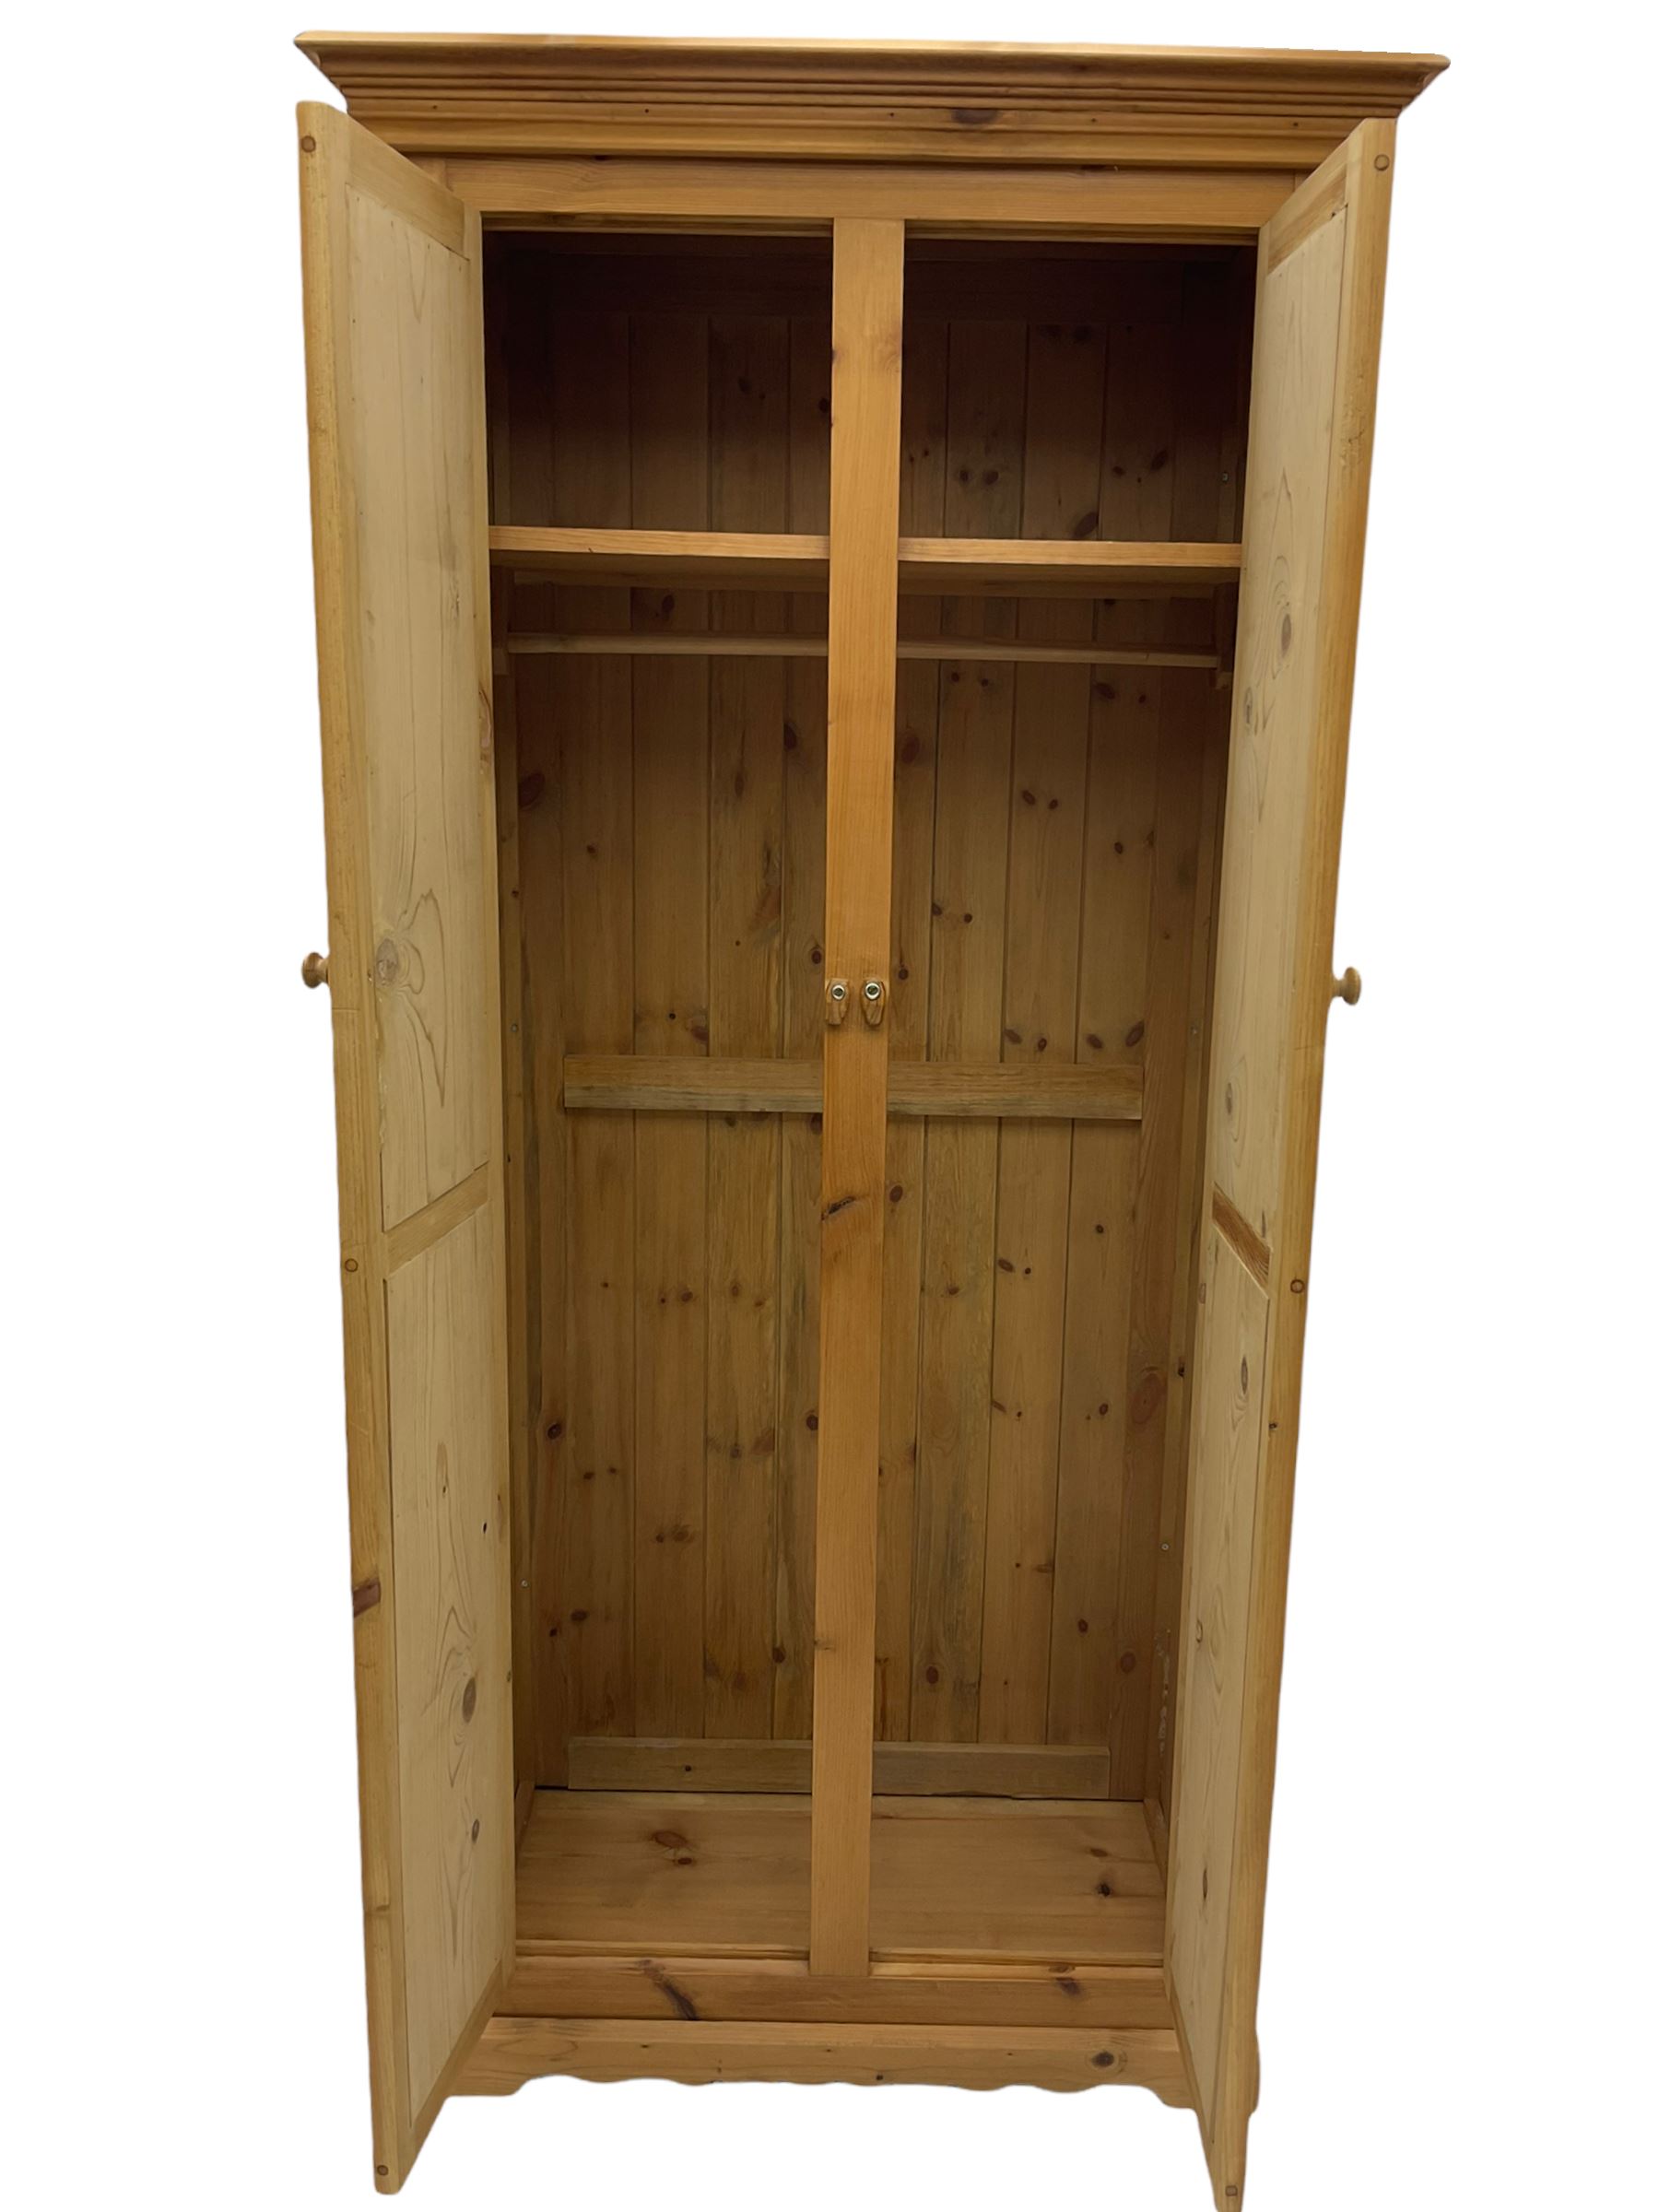 Solid pine double wardrobe - Image 7 of 8